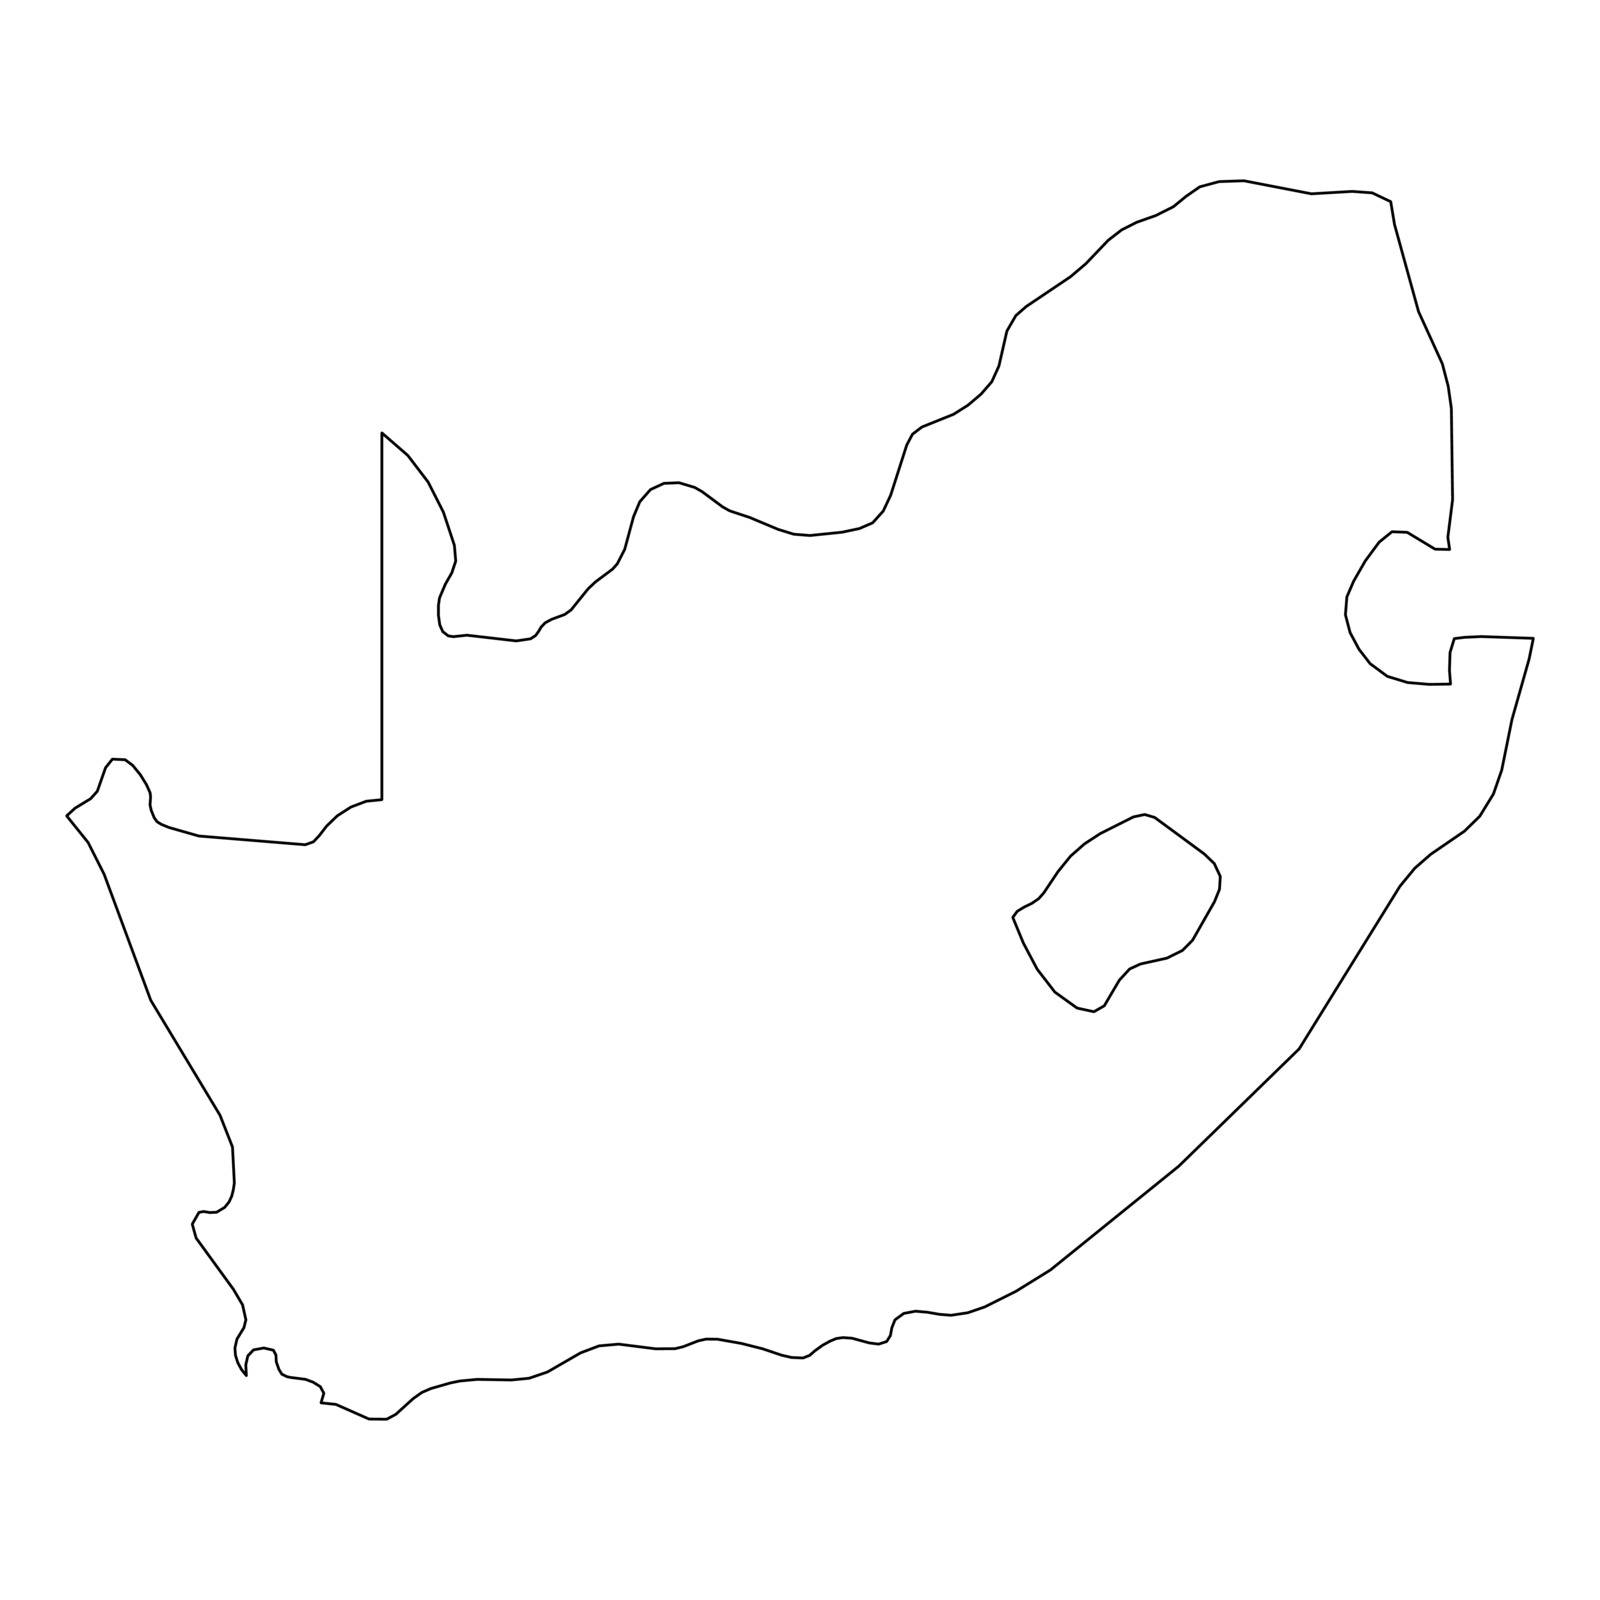 South Africa - solid black outline border map of country area. Simple flat vector illustration by pyty